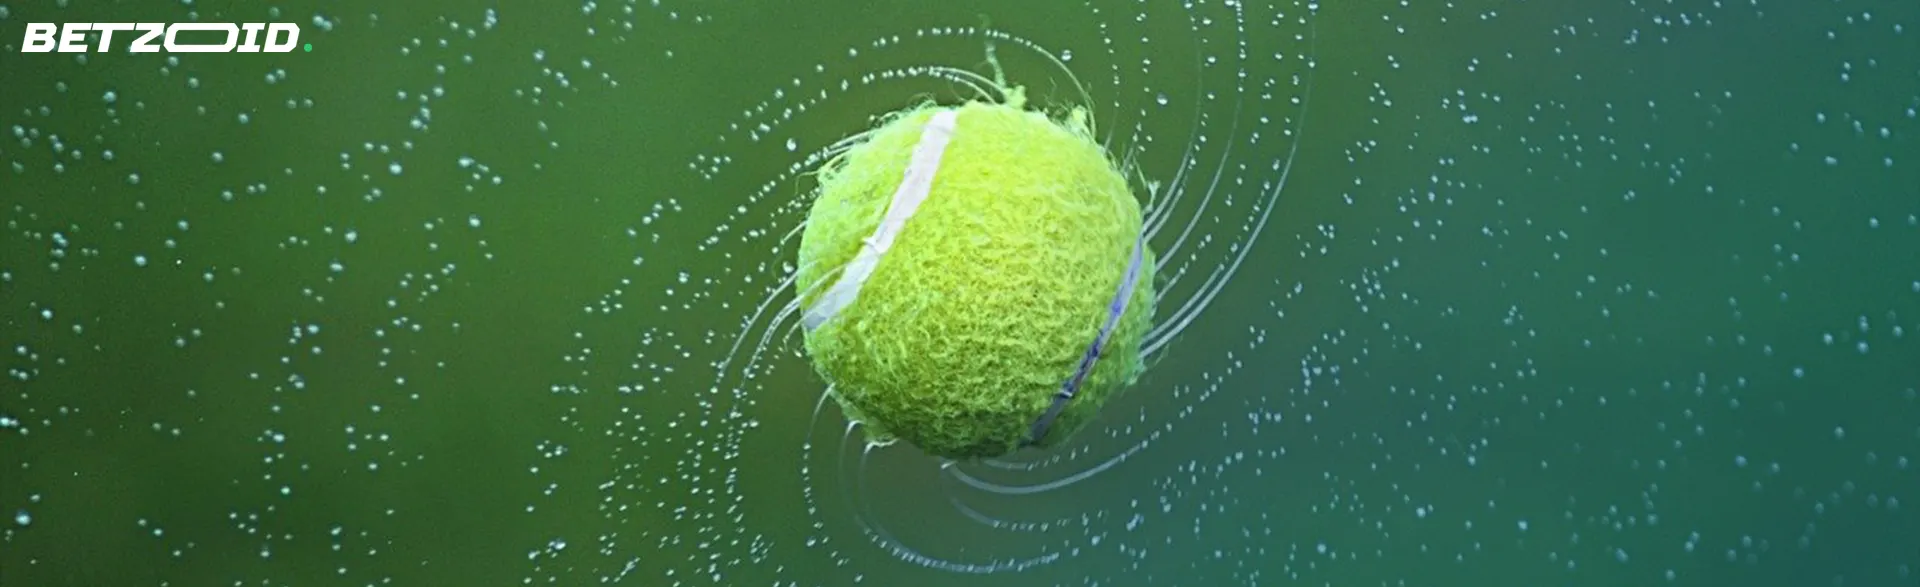 Tennis ball in motion in the air with water drops.